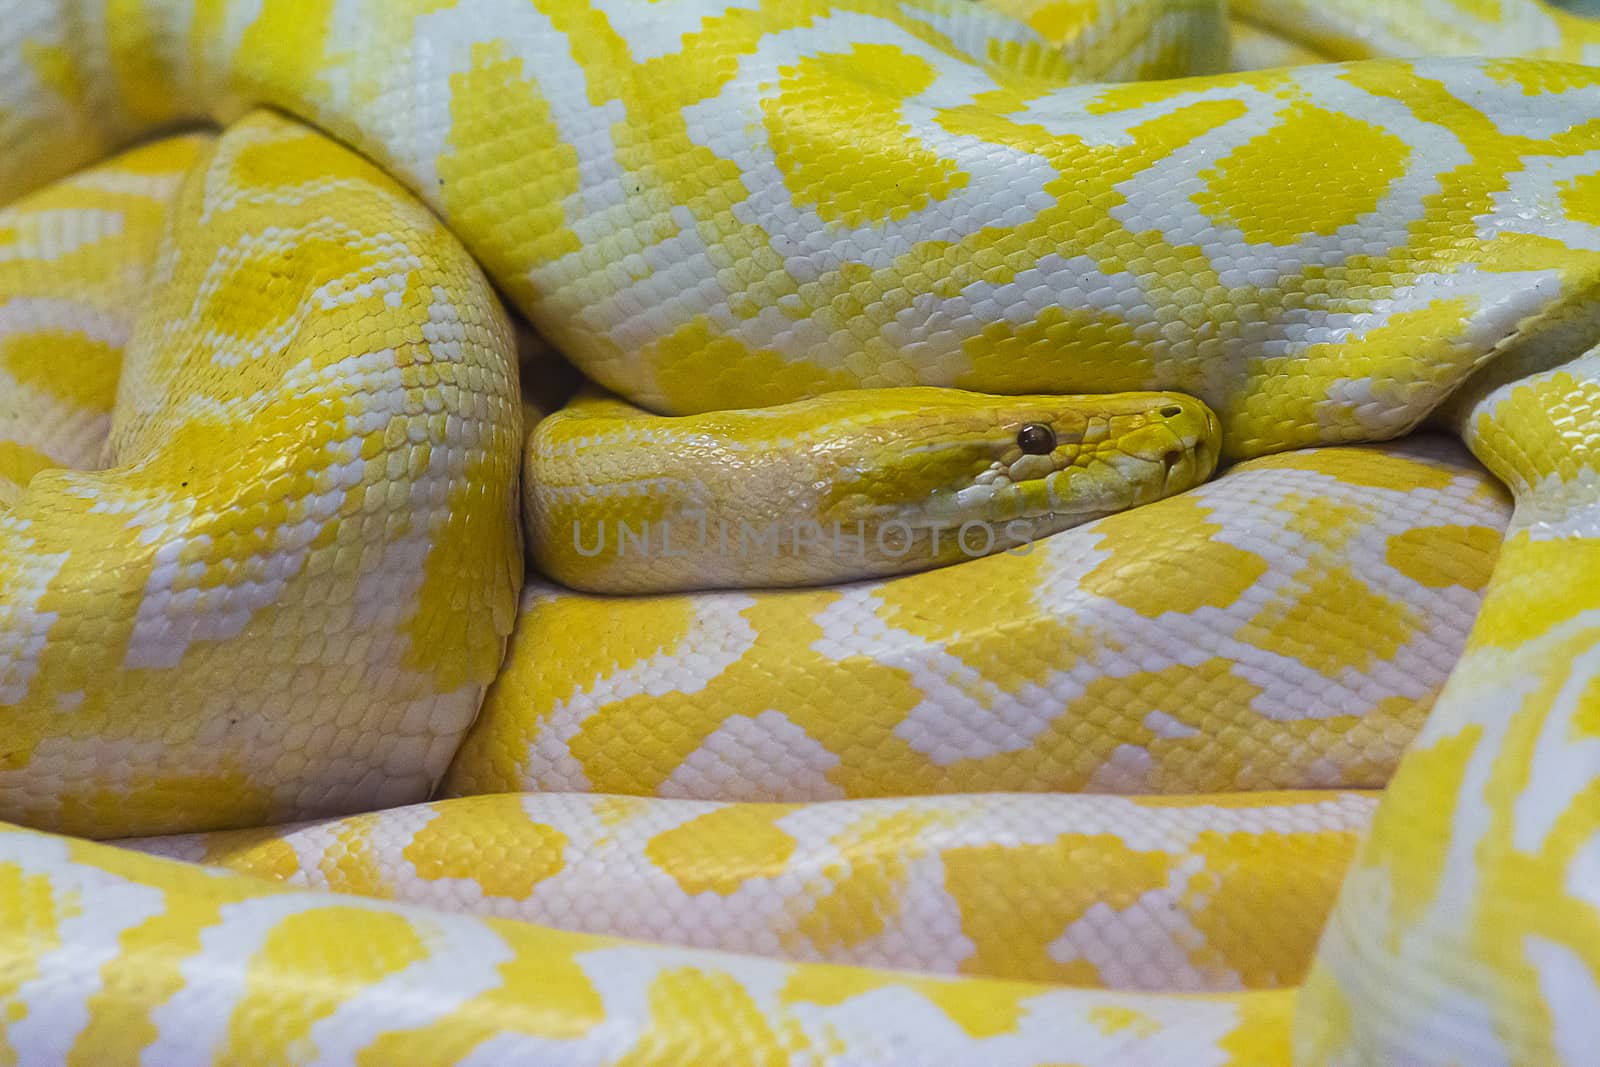 snake huge white and yellow while resting